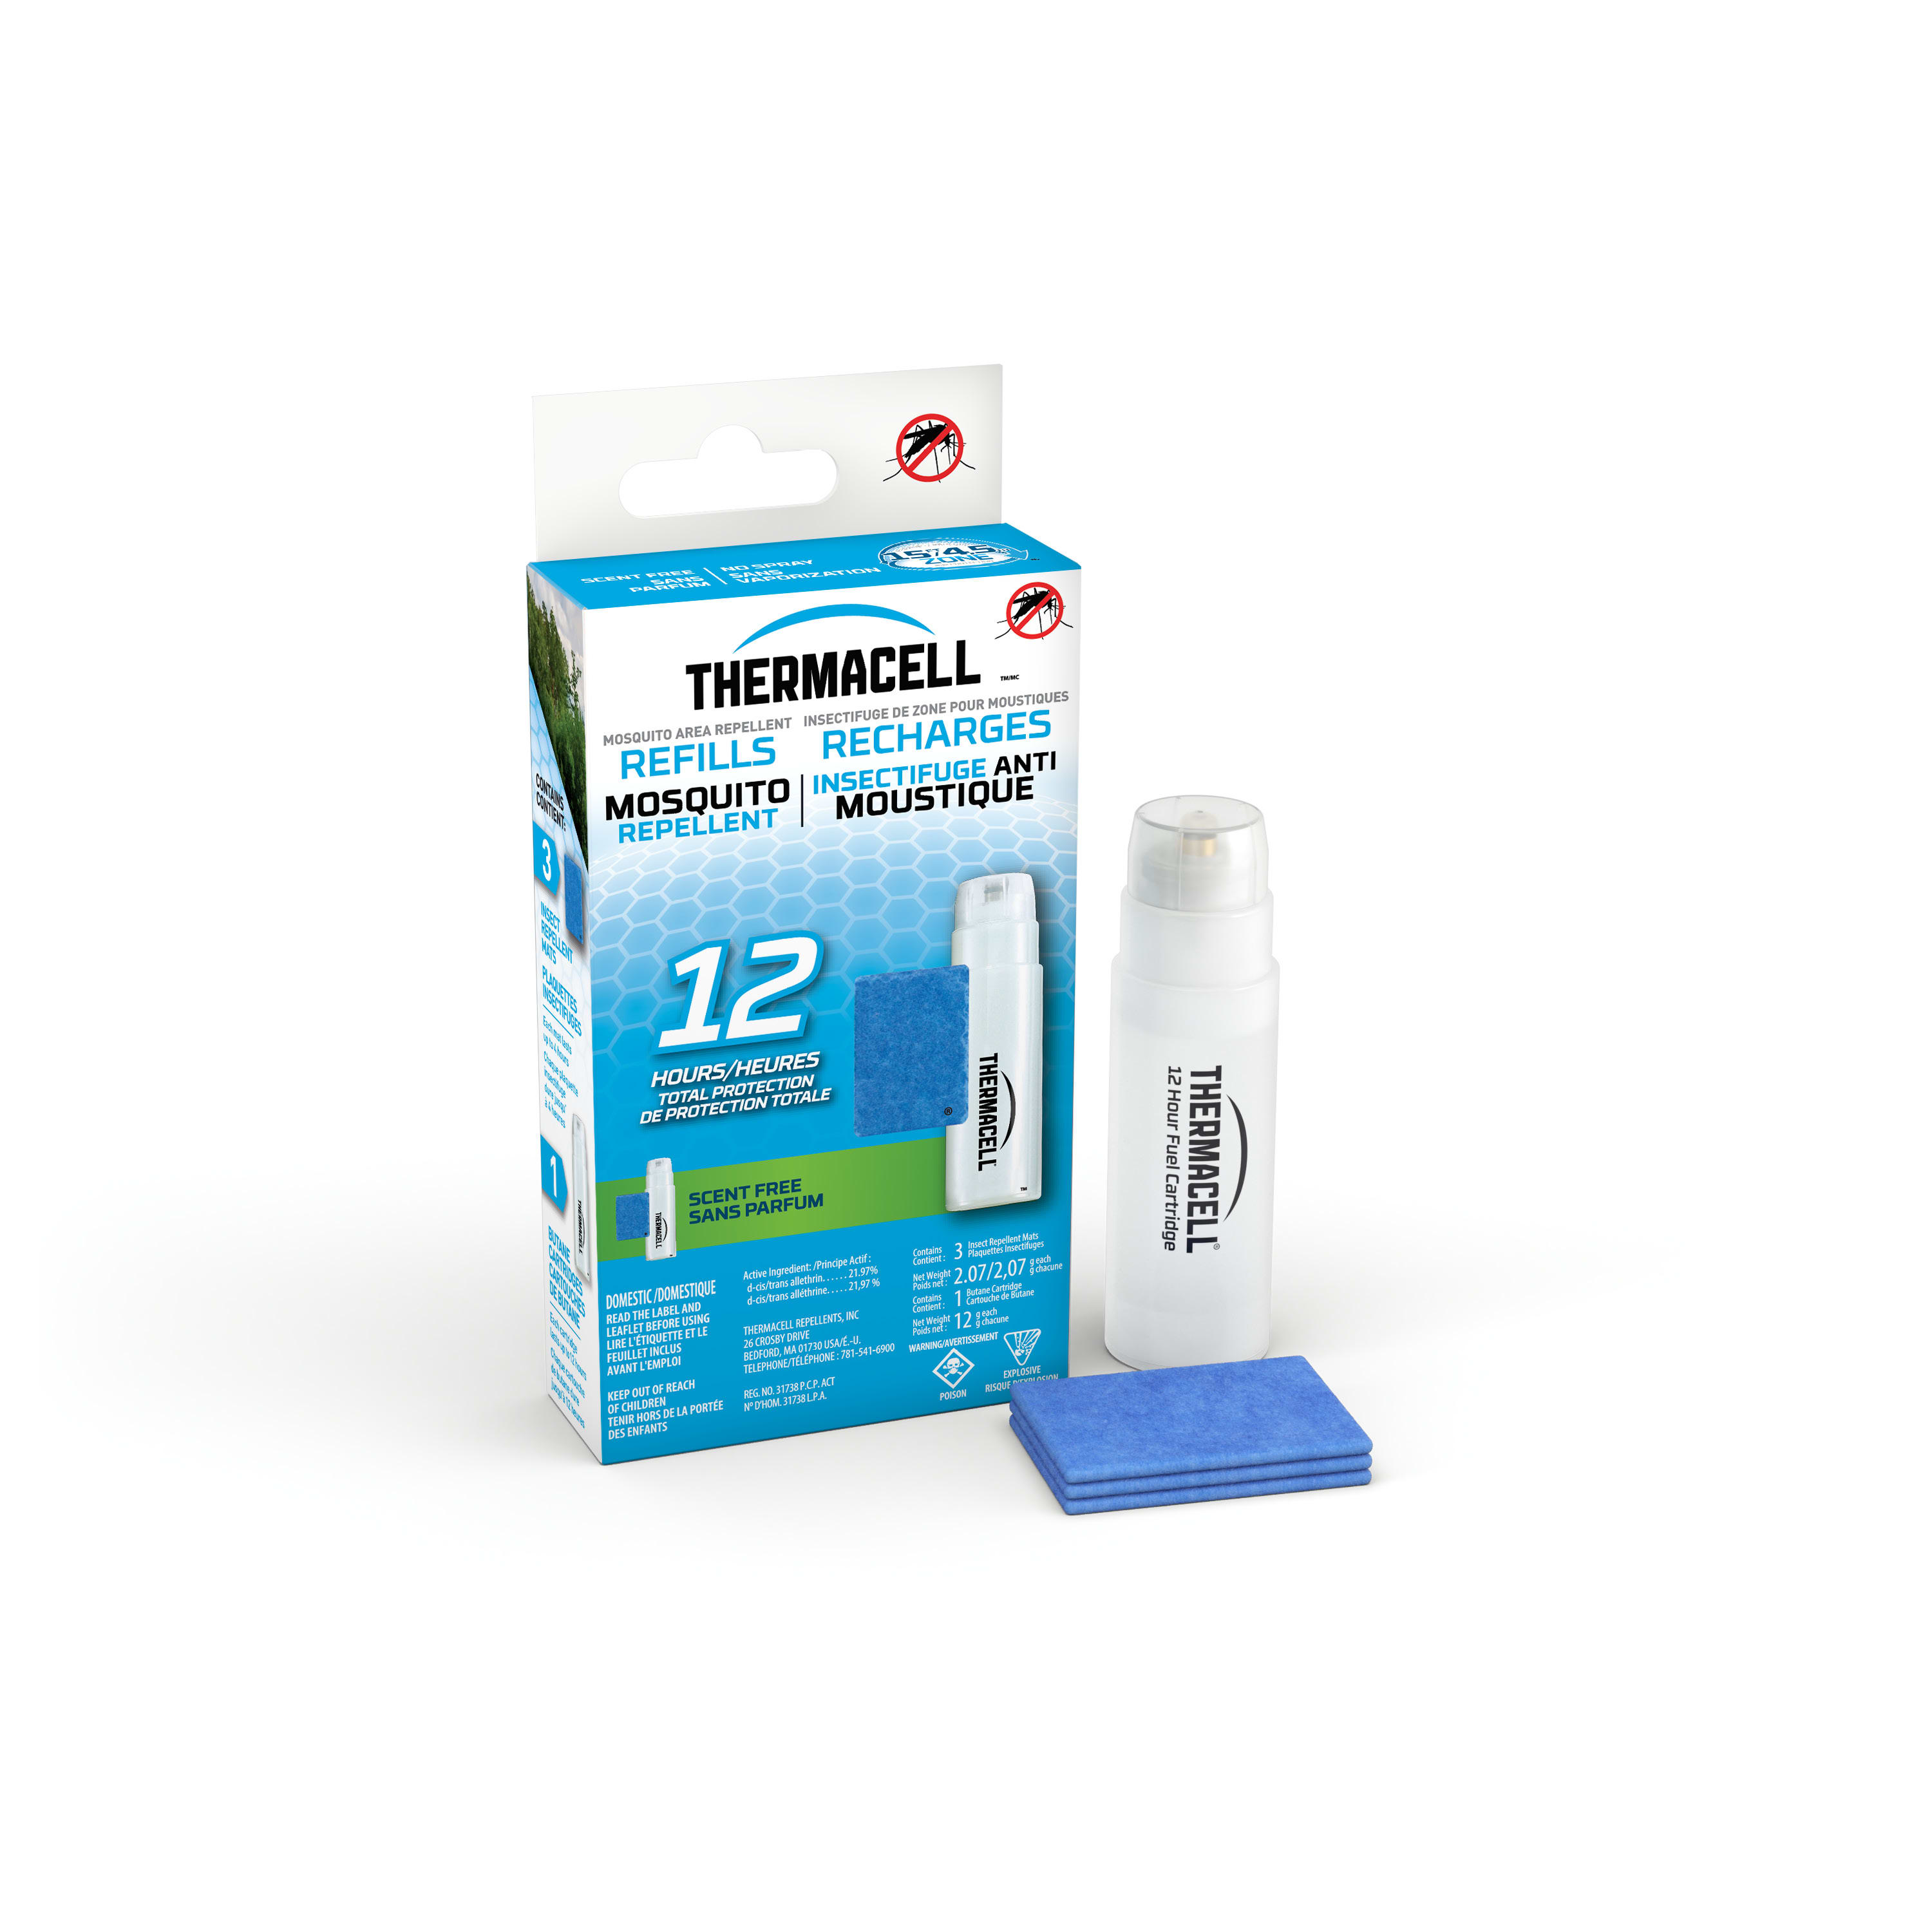 ThermaCELL® Mosquito Repellent Original Refills - 12 Hour